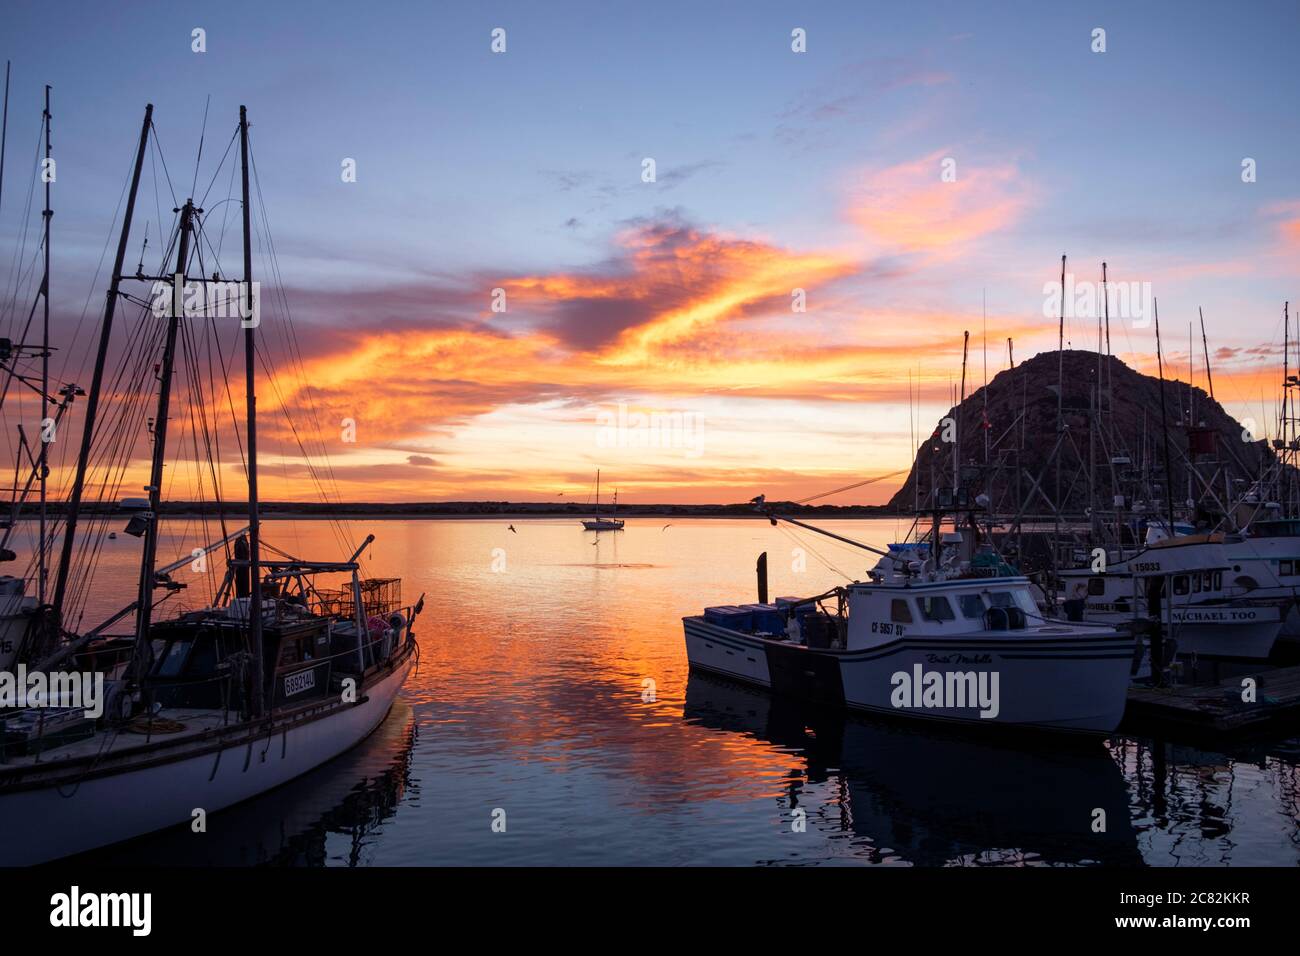 Fiery sunset reflected in Morro Bay among the fishing boats on a calm evening Stock Photo